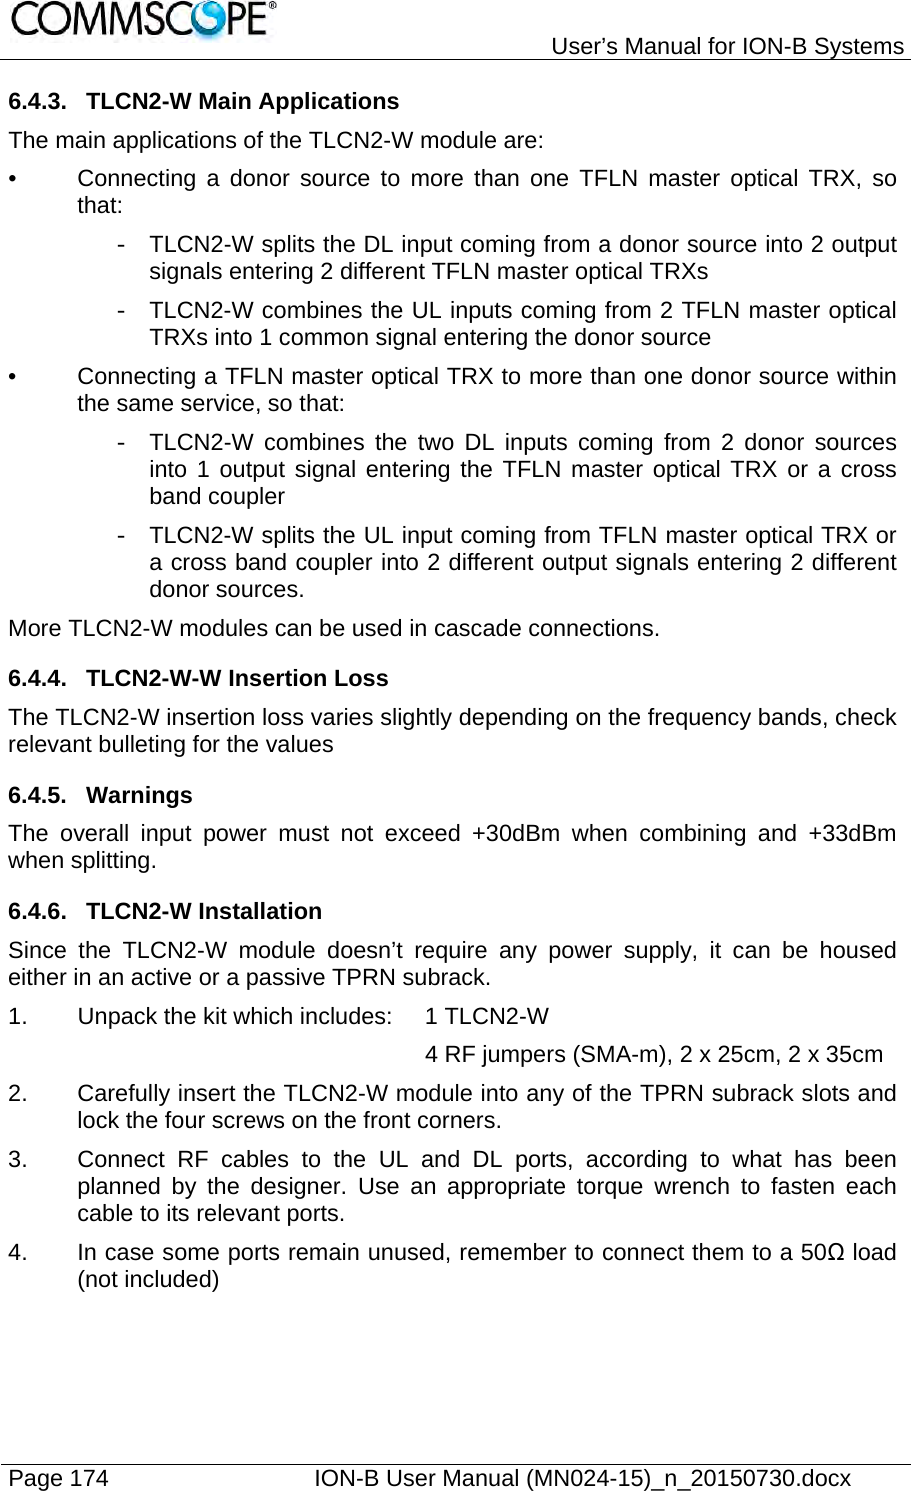   User’s Manual for ION-B Systems Page 174    ION-B User Manual (MN024-15)_n_20150730.docx  6.4.3.  TLCN2-W Main Applications The main applications of the TLCN2-W module are: •  Connecting a donor source to more than one TFLN master optical TRX, so that: -  TLCN2-W splits the DL input coming from a donor source into 2 output signals entering 2 different TFLN master optical TRXs -  TLCN2-W combines the UL inputs coming from 2 TFLN master optical TRXs into 1 common signal entering the donor source •  Connecting a TFLN master optical TRX to more than one donor source within the same service, so that: -  TLCN2-W combines the two DL inputs coming from 2 donor sources into 1 output signal entering the TFLN master optical TRX or a cross band coupler -  TLCN2-W splits the UL input coming from TFLN master optical TRX or a cross band coupler into 2 different output signals entering 2 different donor sources. More TLCN2-W modules can be used in cascade connections. 6.4.4. TLCN2-W-W Insertion Loss The TLCN2-W insertion loss varies slightly depending on the frequency bands, check relevant bulleting for the values 6.4.5. Warnings The overall input power must not exceed +30dBm when combining and +33dBm when splitting. 6.4.6. TLCN2-W Installation Since the TLCN2-W module doesn’t require any power supply, it can be housed either in an active or a passive TPRN subrack. 1.  Unpack the kit which includes:  1 TLCN2-W 4 RF jumpers (SMA-m), 2 x 25cm, 2 x 35cm 2.  Carefully insert the TLCN2-W module into any of the TPRN subrack slots and lock the four screws on the front corners. 3.  Connect RF cables to the UL and DL ports, according to what has been planned by the designer. Use an appropriate torque wrench to fasten each cable to its relevant ports. 4.  In case some ports remain unused, remember to connect them to a 50Ω load (not included) 